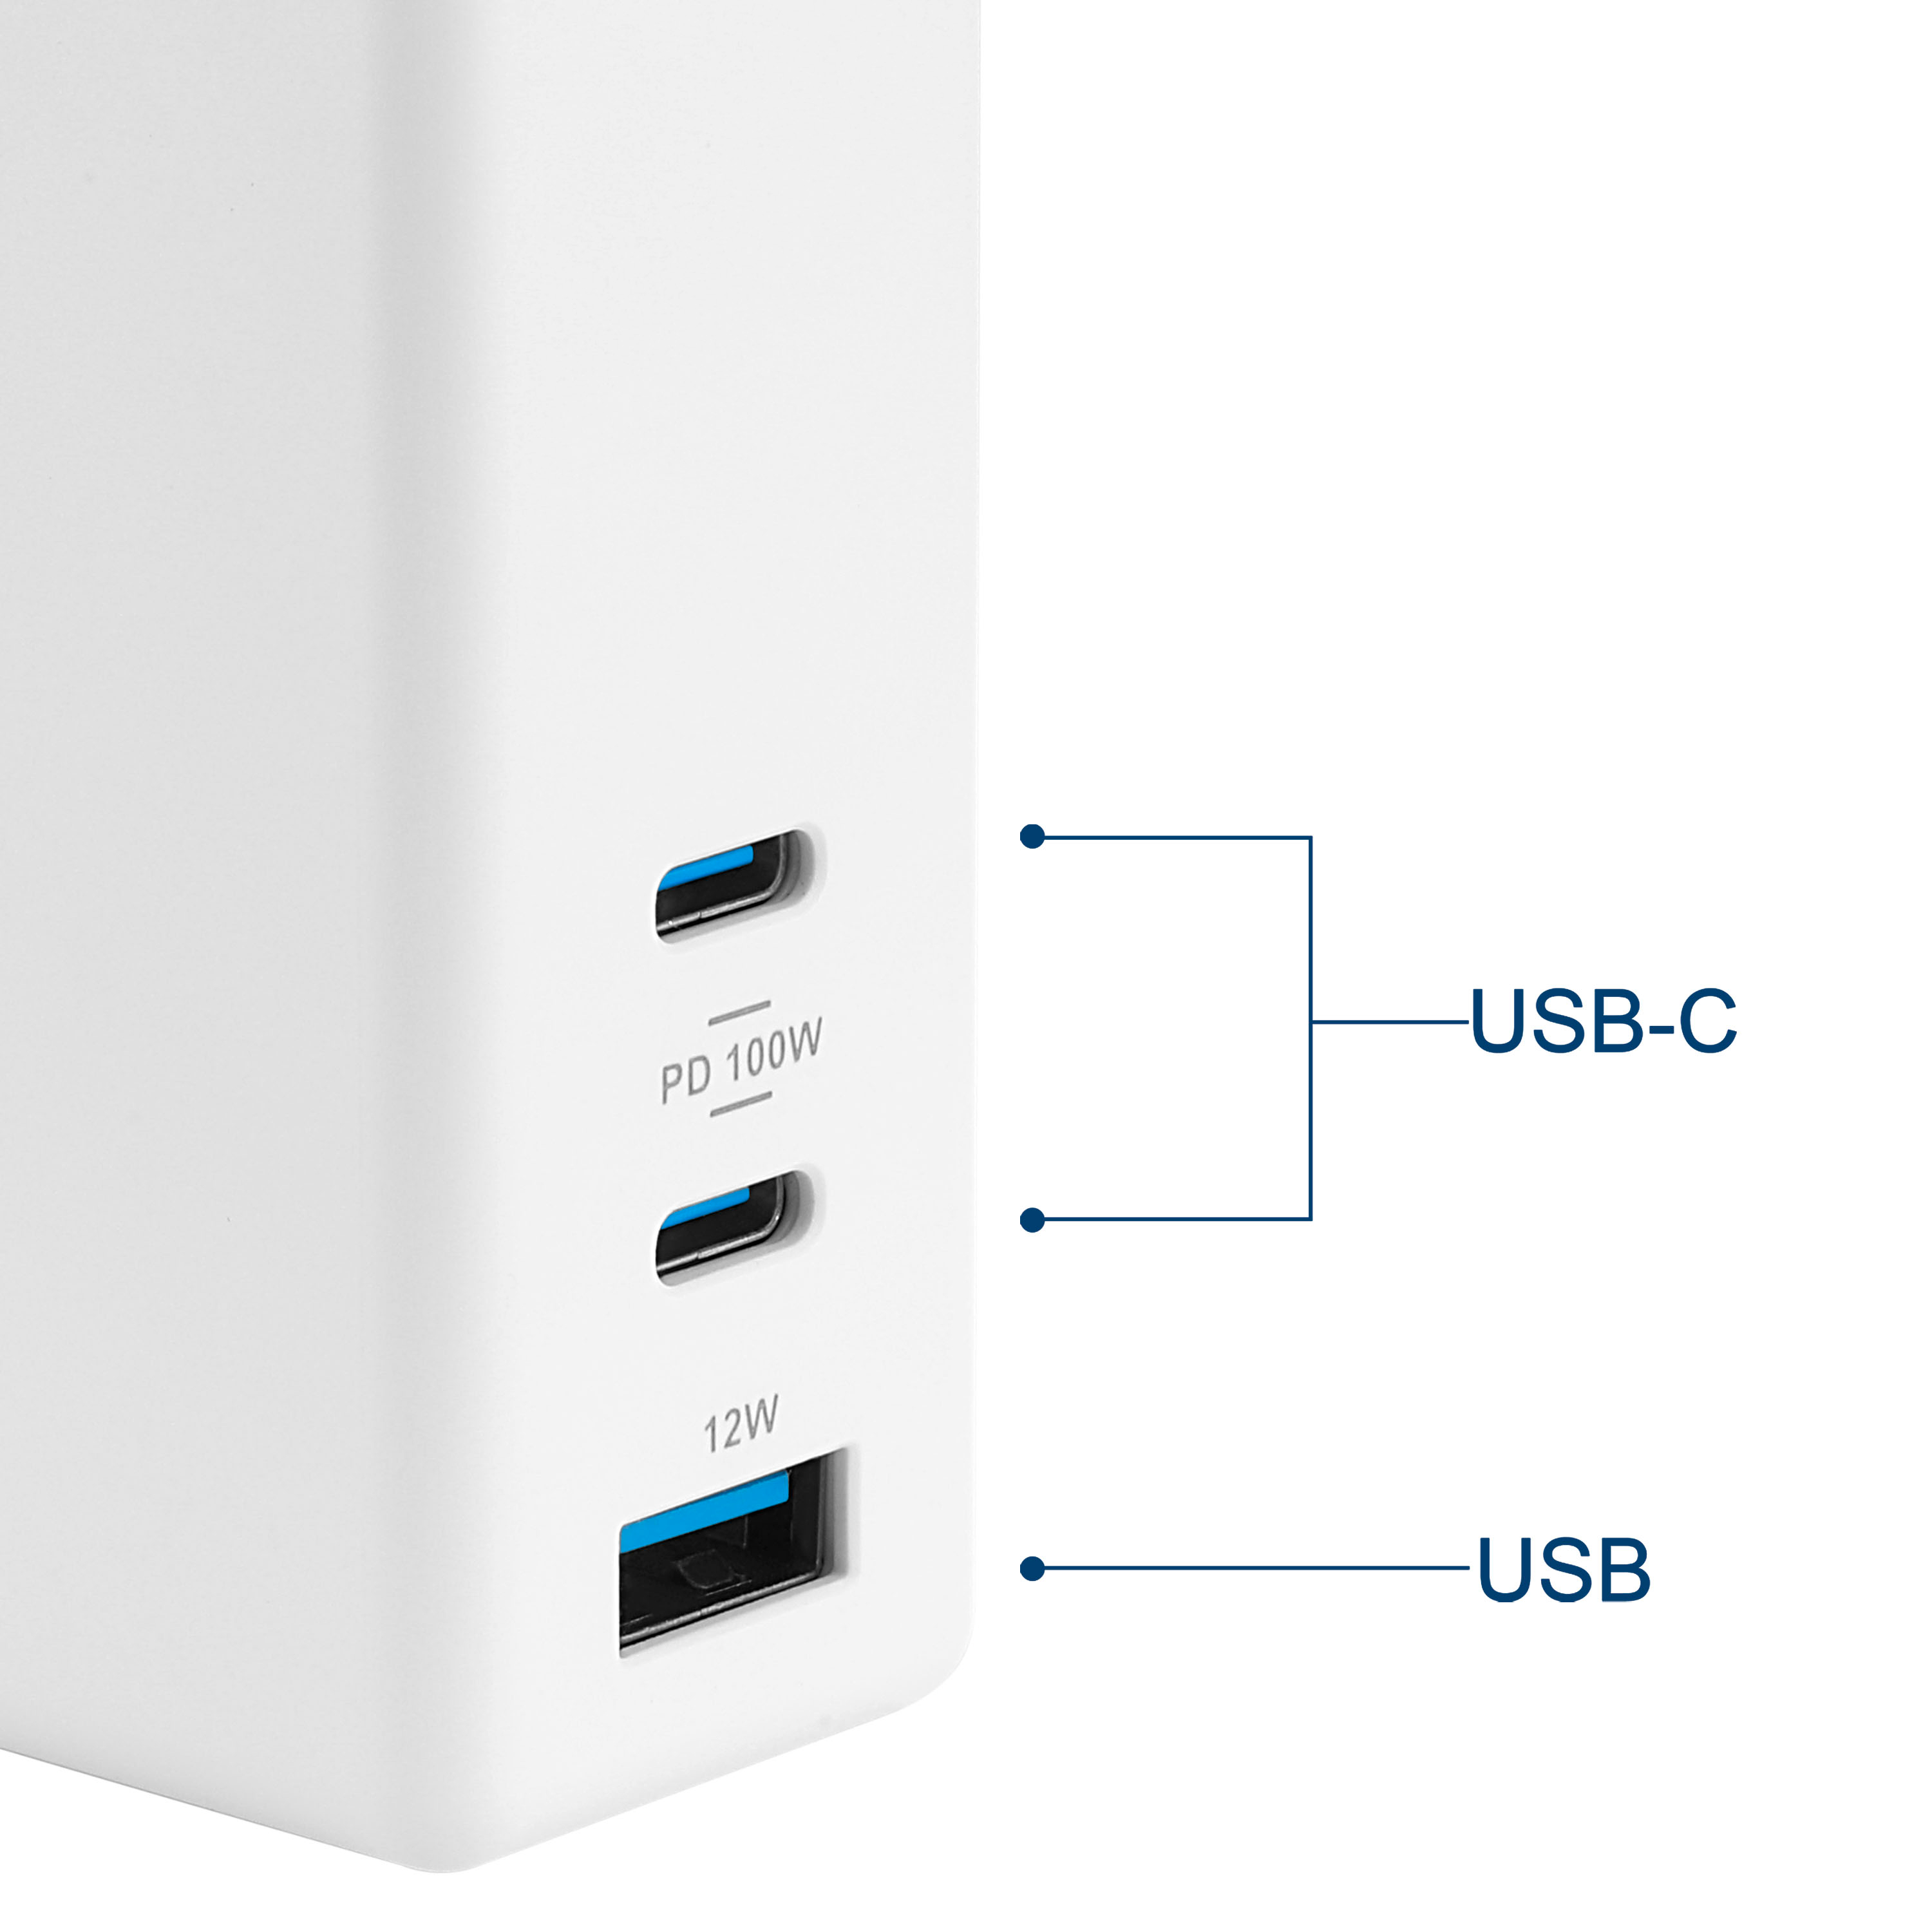 Insignia™ 112W Foldable Wall Charger with 2 USB-C and 1 USB Port